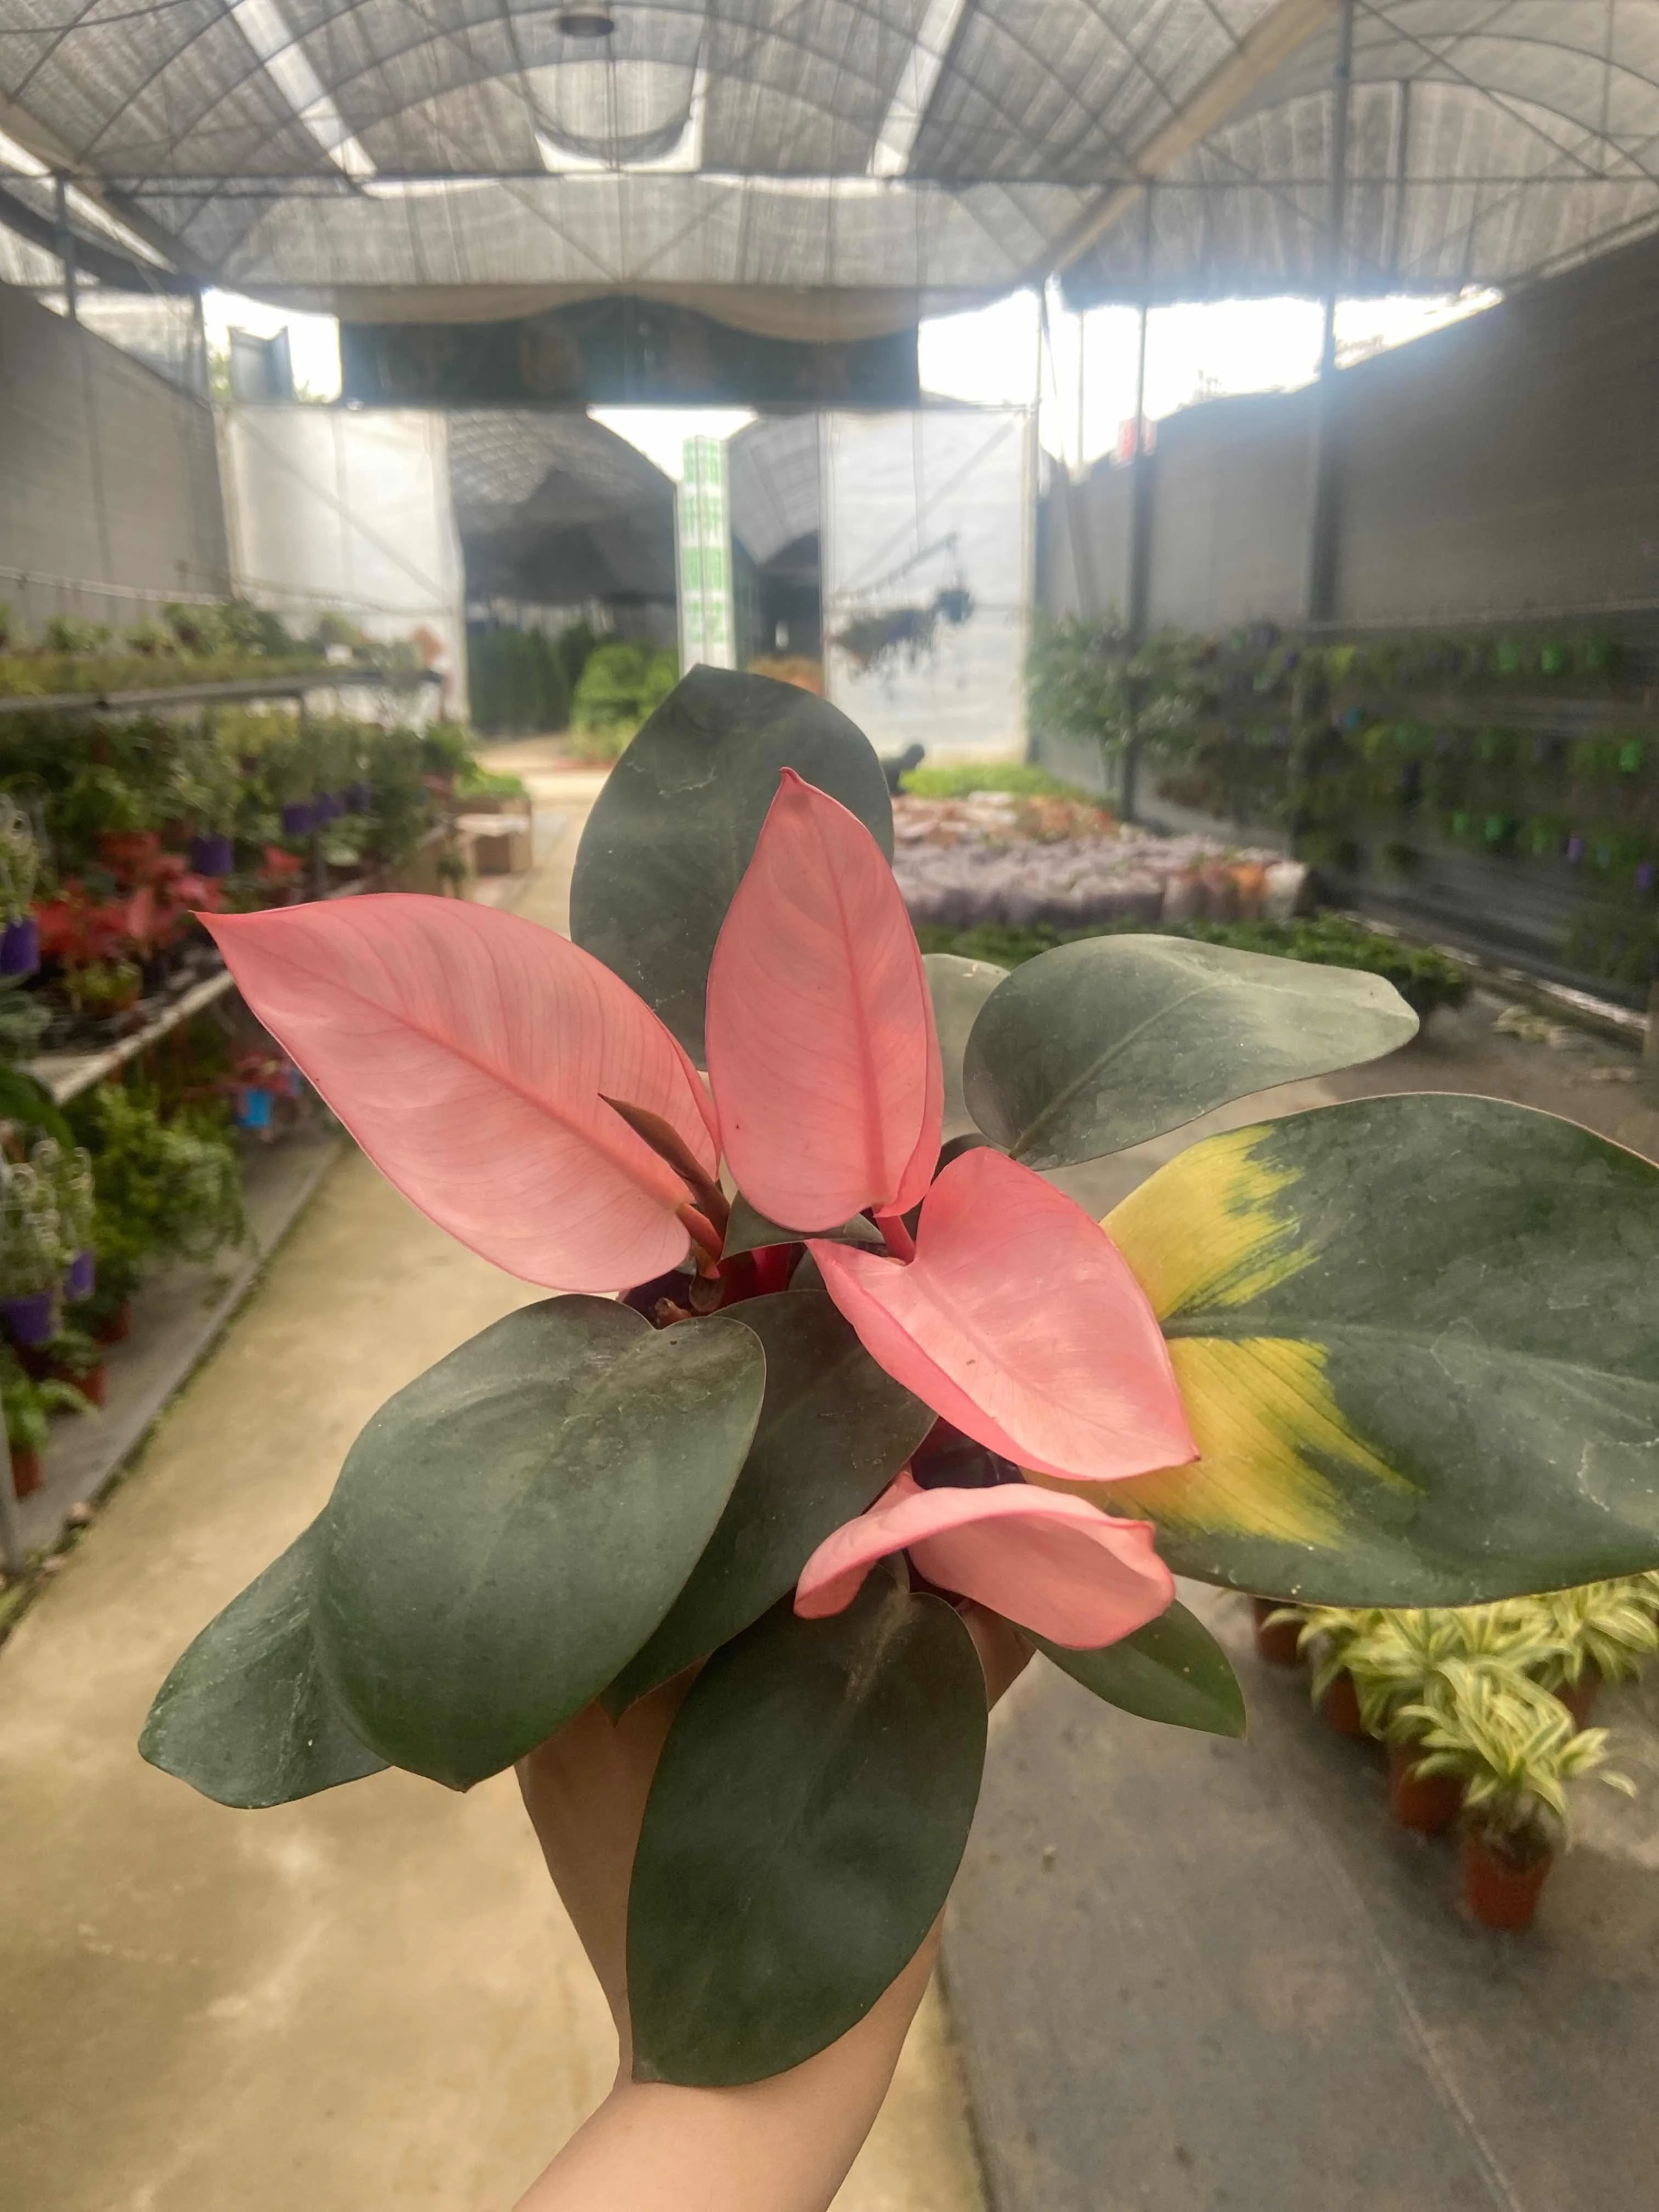 
Philodendron Pink Congo 